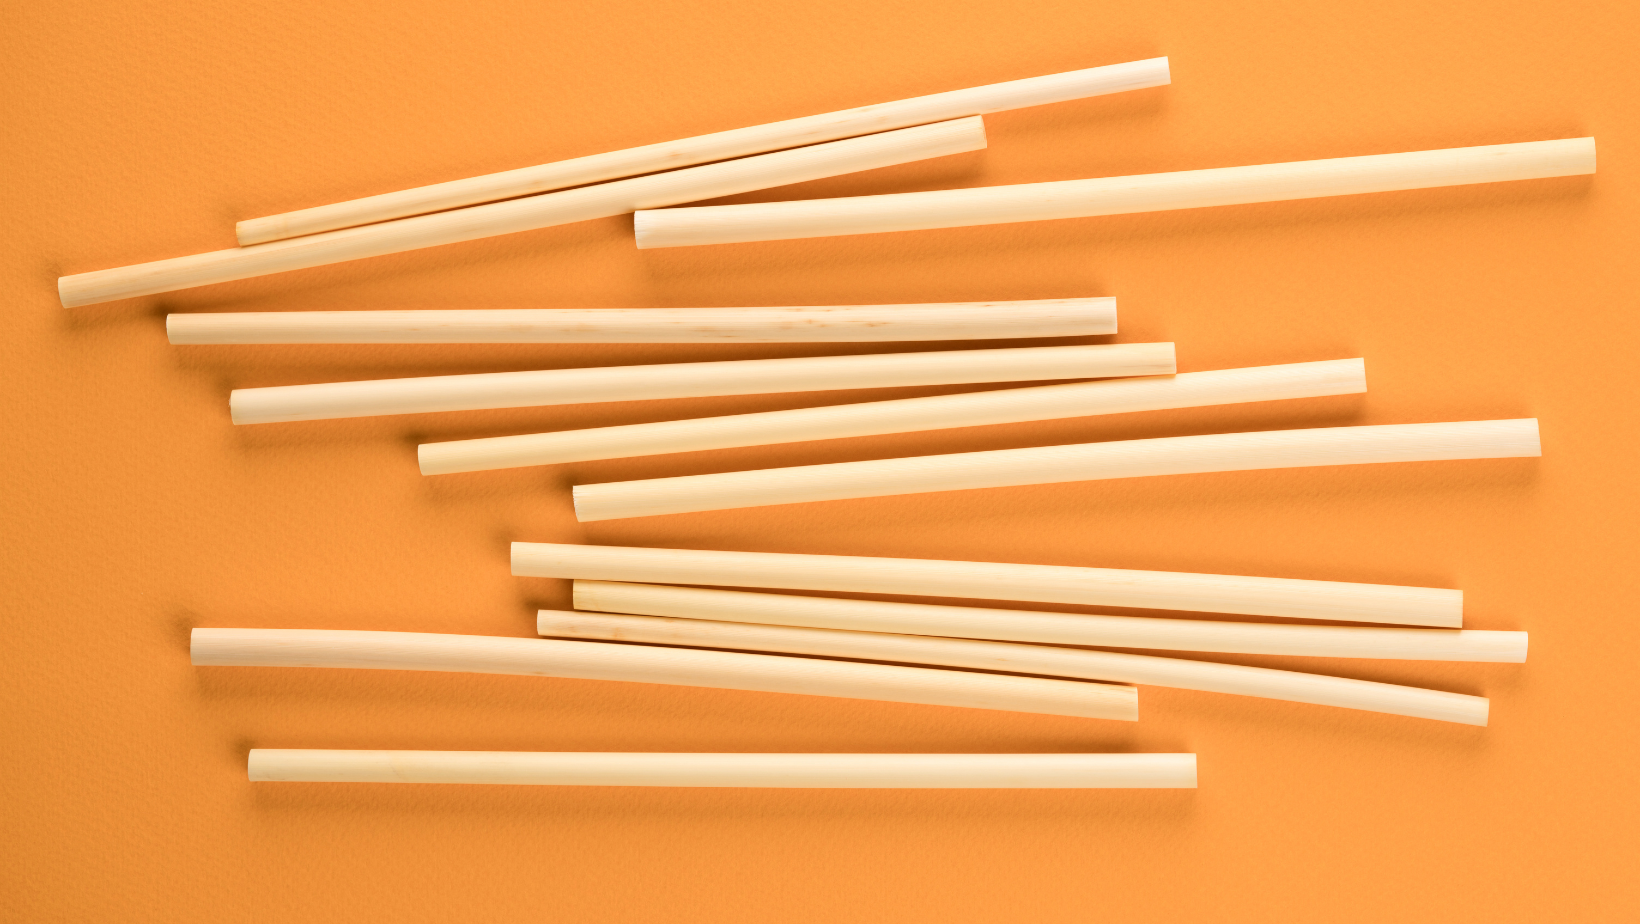 Natural biodegradable wheat drinking straws made of the stem of the wheat plant on orange background. Sustainable lifestyle and zero waste concept. Ethical consumerism. Flat lay